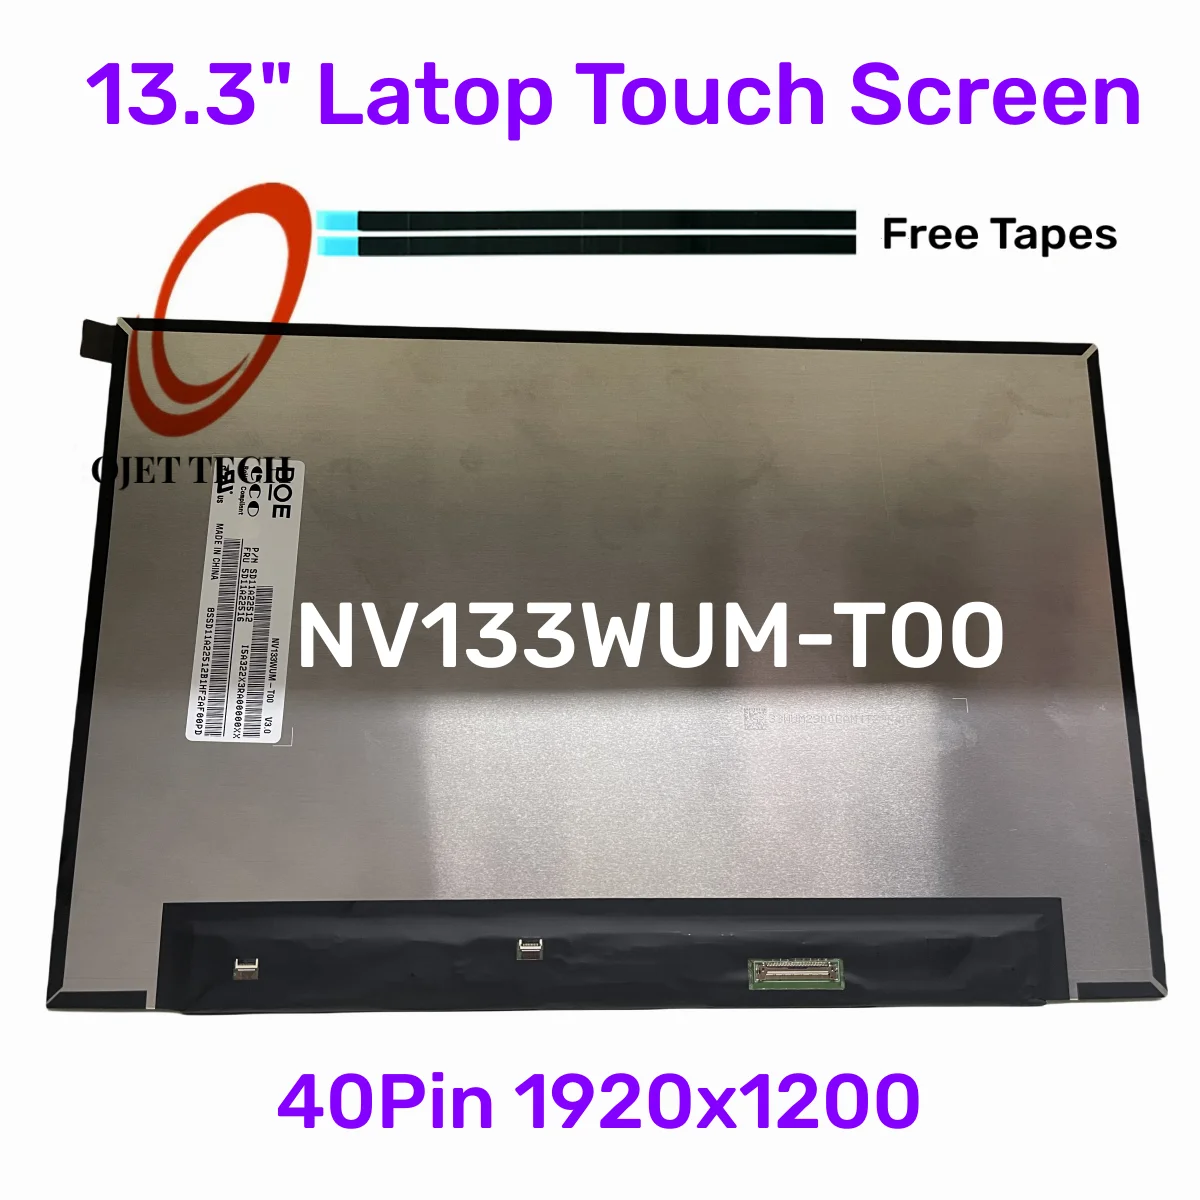 

13.3" Touch Screen NV133WUM-T00 V3.0 Fit R133NW4K R0 For Lenovo ThinkPad X13 Gen 2 EDP 40Pin 1920x1200 LCD Display Panel